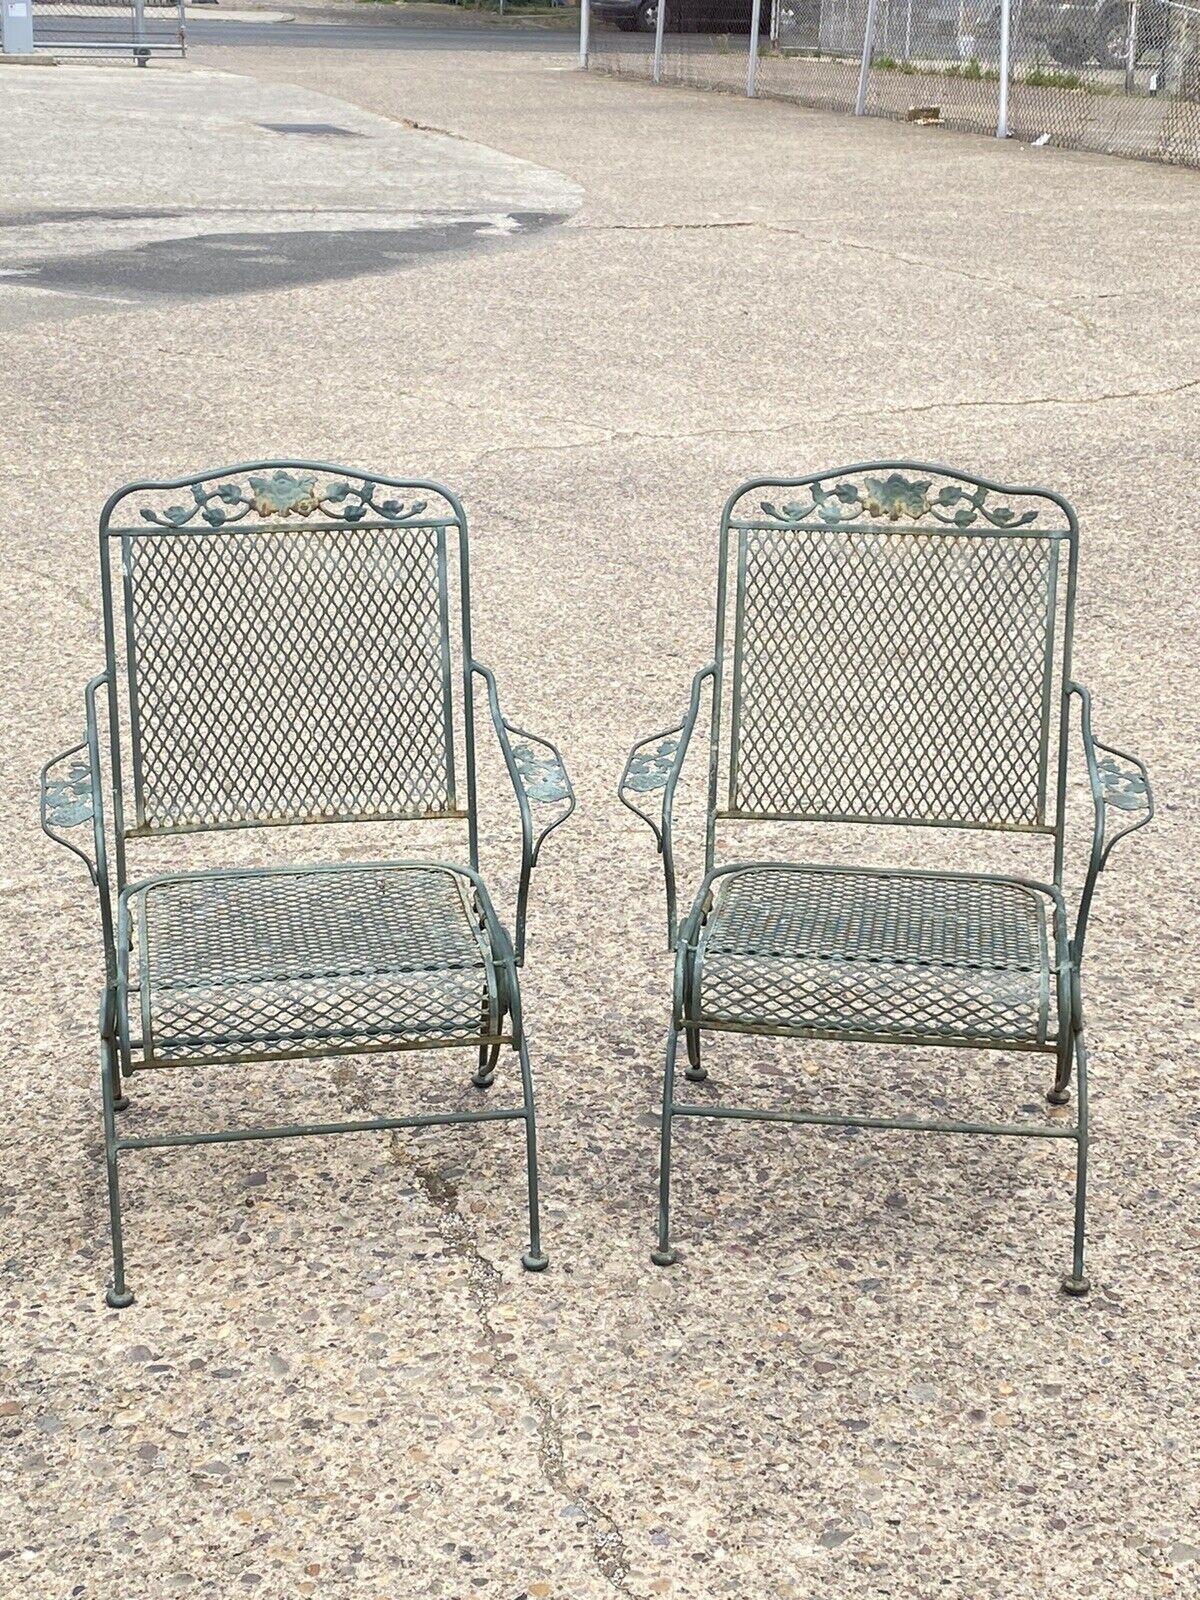 Vintage Meadowcraft Dogwood Green Wrought Iron Outdoor Patio Coil Spring Chairs - a Pair. Circa Mid to Late 20th Century. Measurements: 38